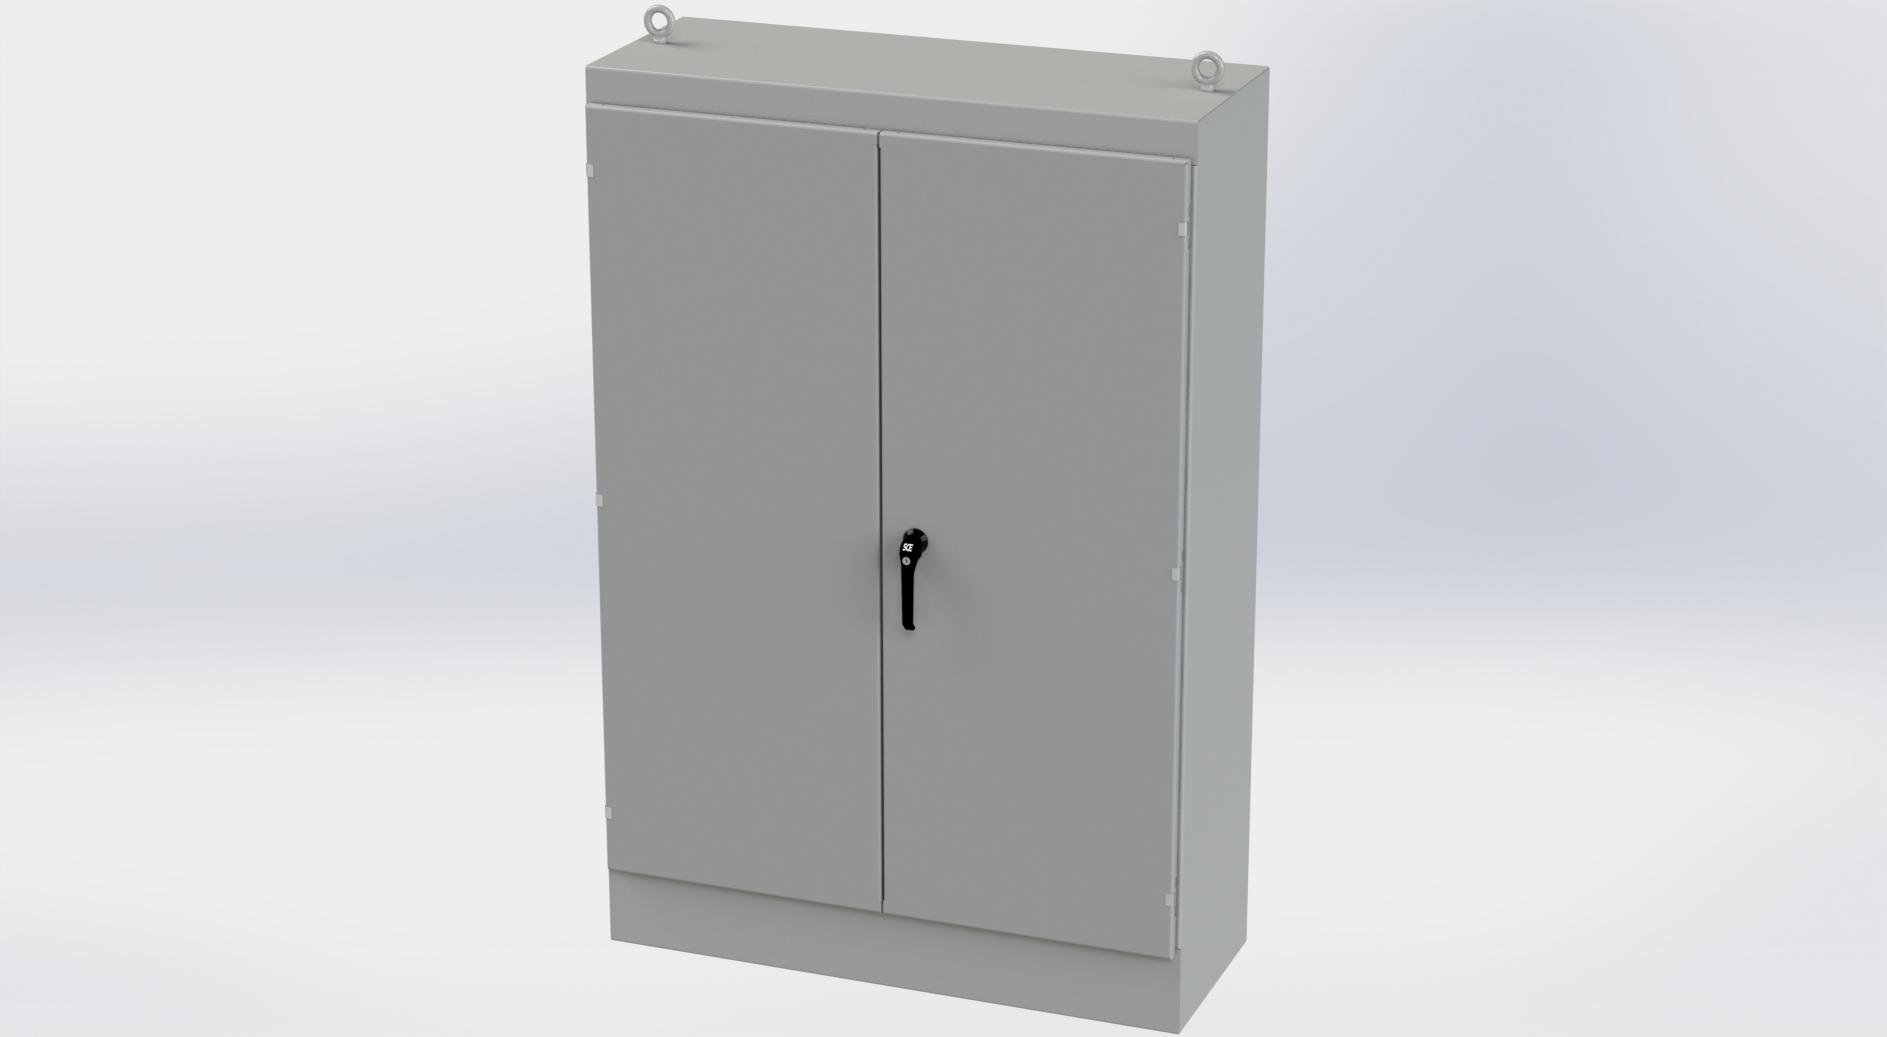 Saginaw Control SCE-724818FSD FSD Enclosure, Height:72.00", Width:48.00", Depth:18.00", ANSI-61 gray finish inside and out. Optional sub-panels are powder coated white.